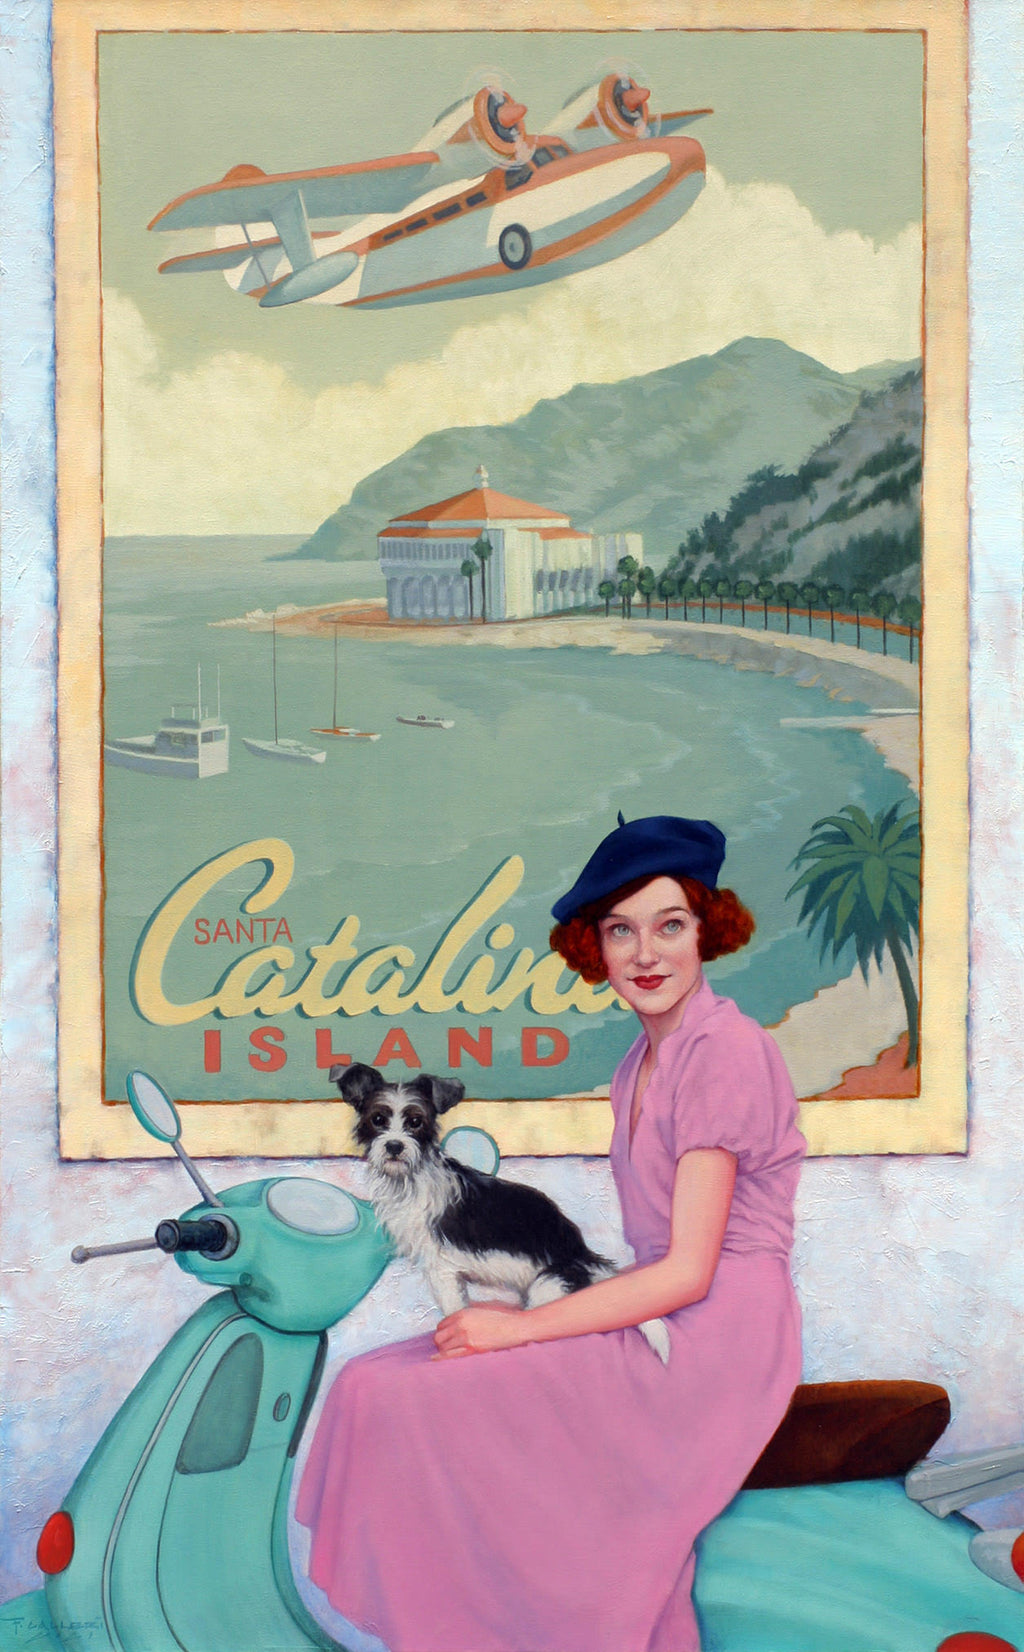 Oil on canvas painting of a woman in a pink dress and blue beret sitting on a light green moped with a black and white dog on her lap. Background is a wall with a poster of "Santa Catalina Island"